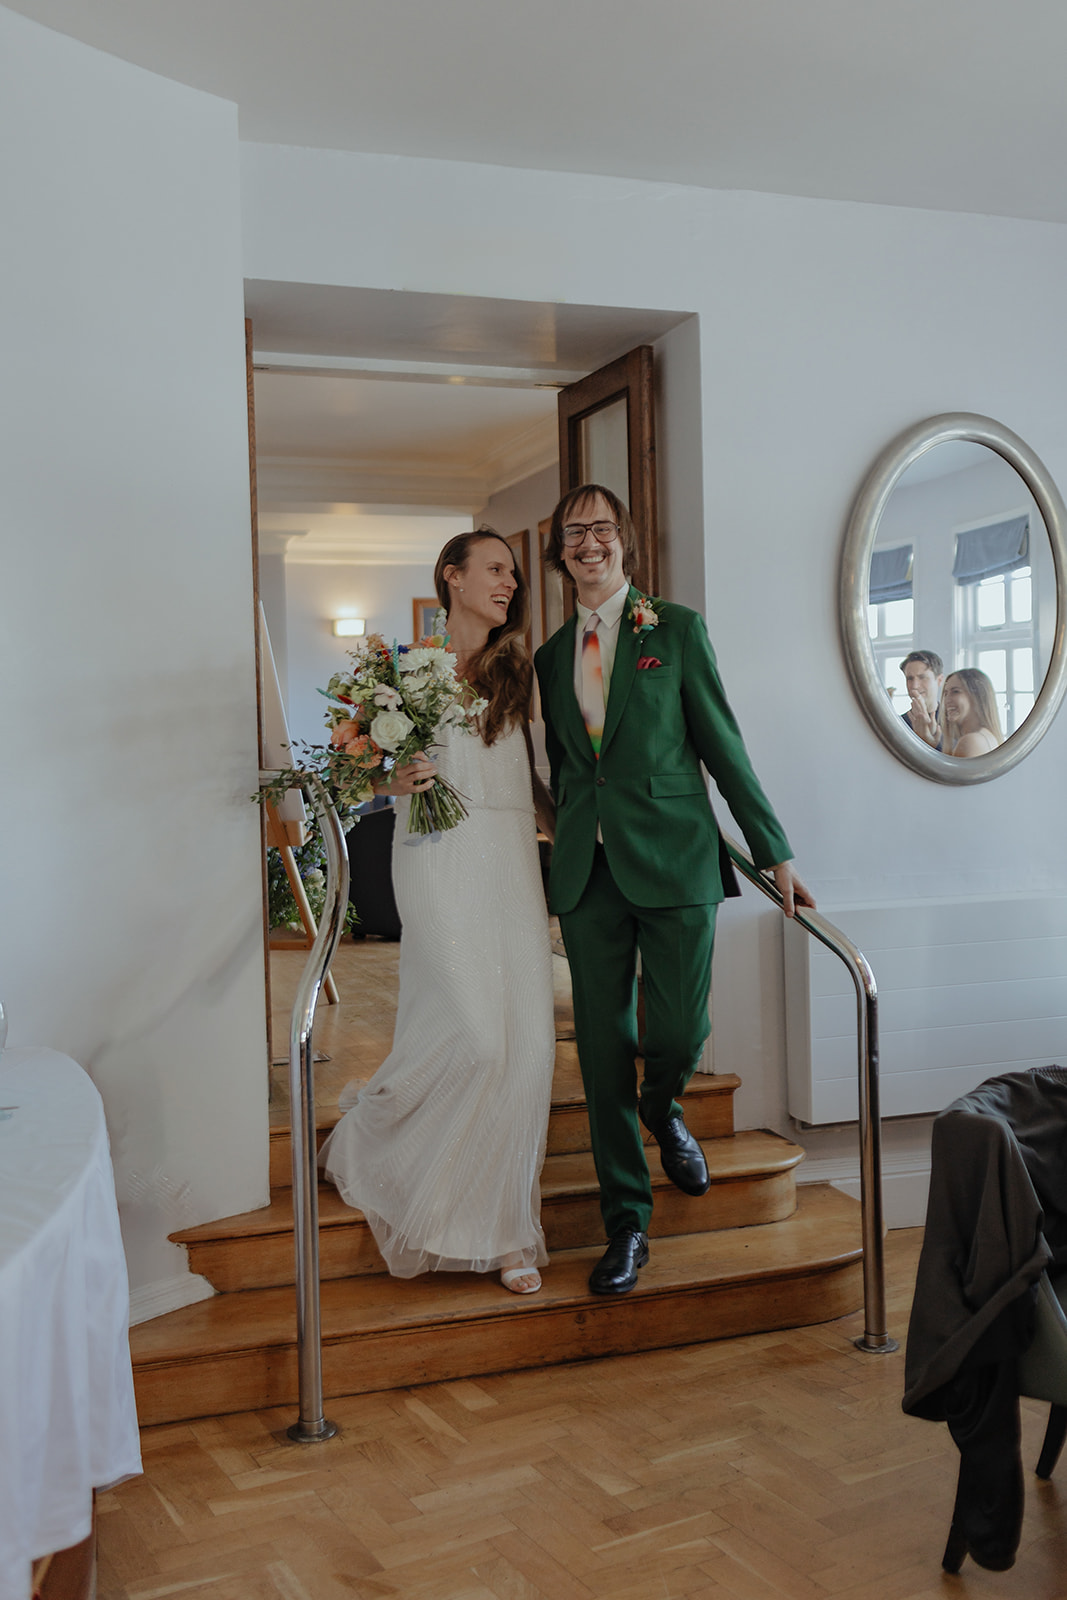 Bride and groom entrance photos at Frances quinn wedding in wales